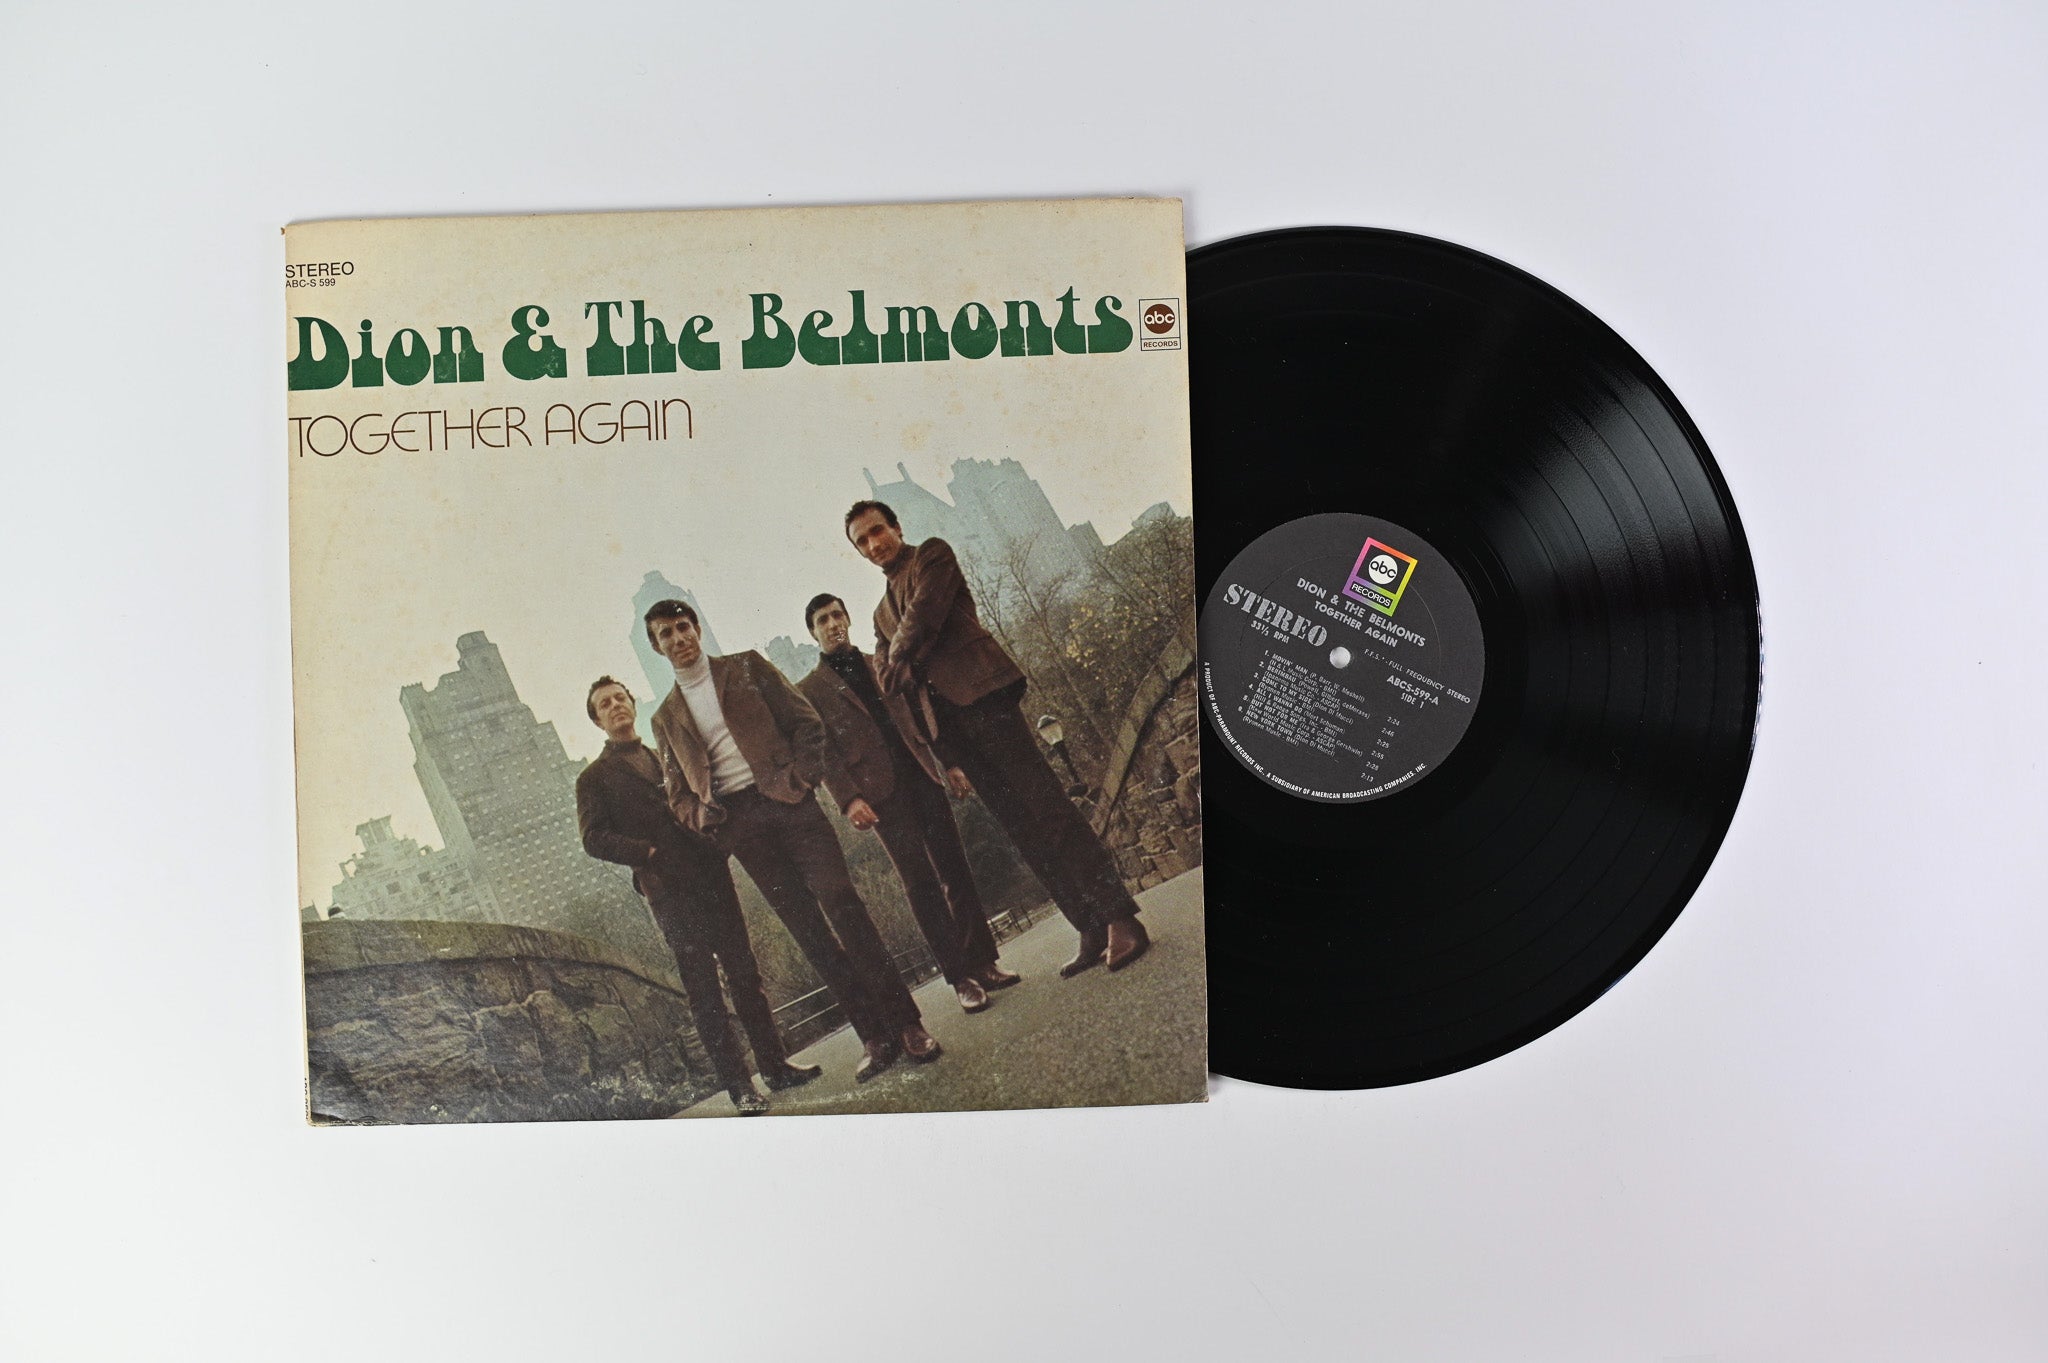 Dion & The Belmonts - Together Again on ABC